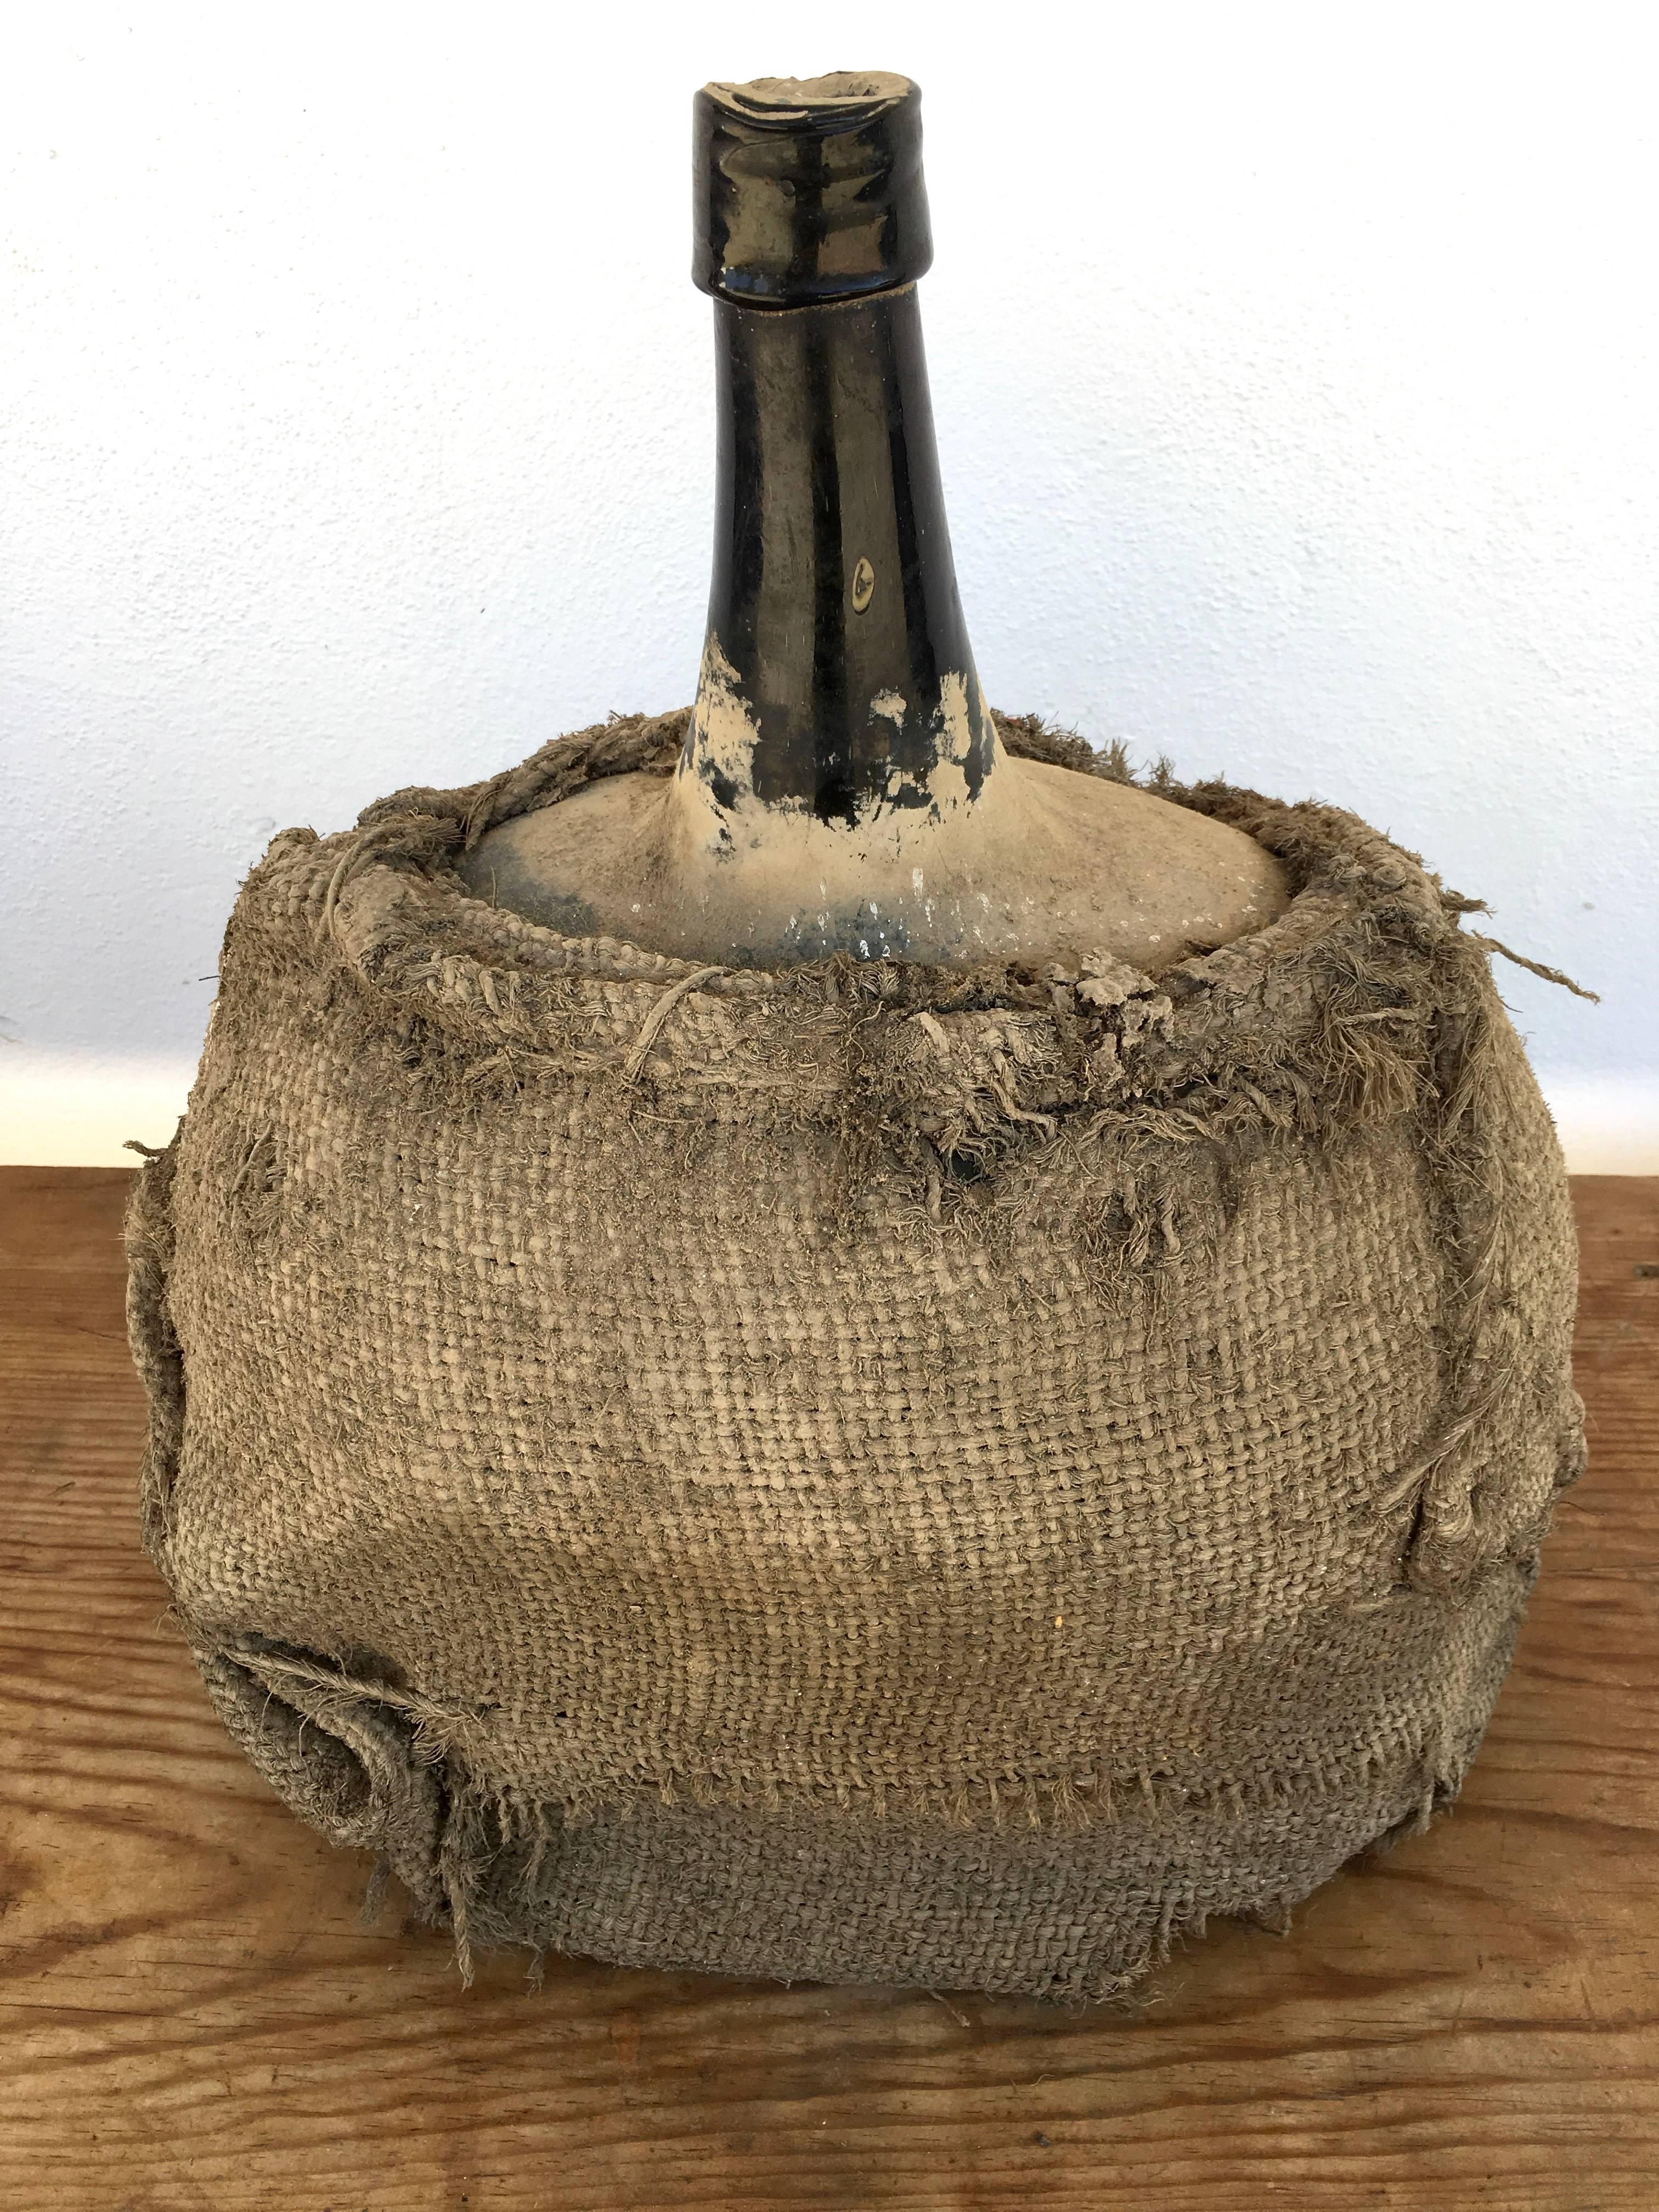 Hand-Crafted Demijohn Bottle Late 19th Century from Veracruz, Mexico